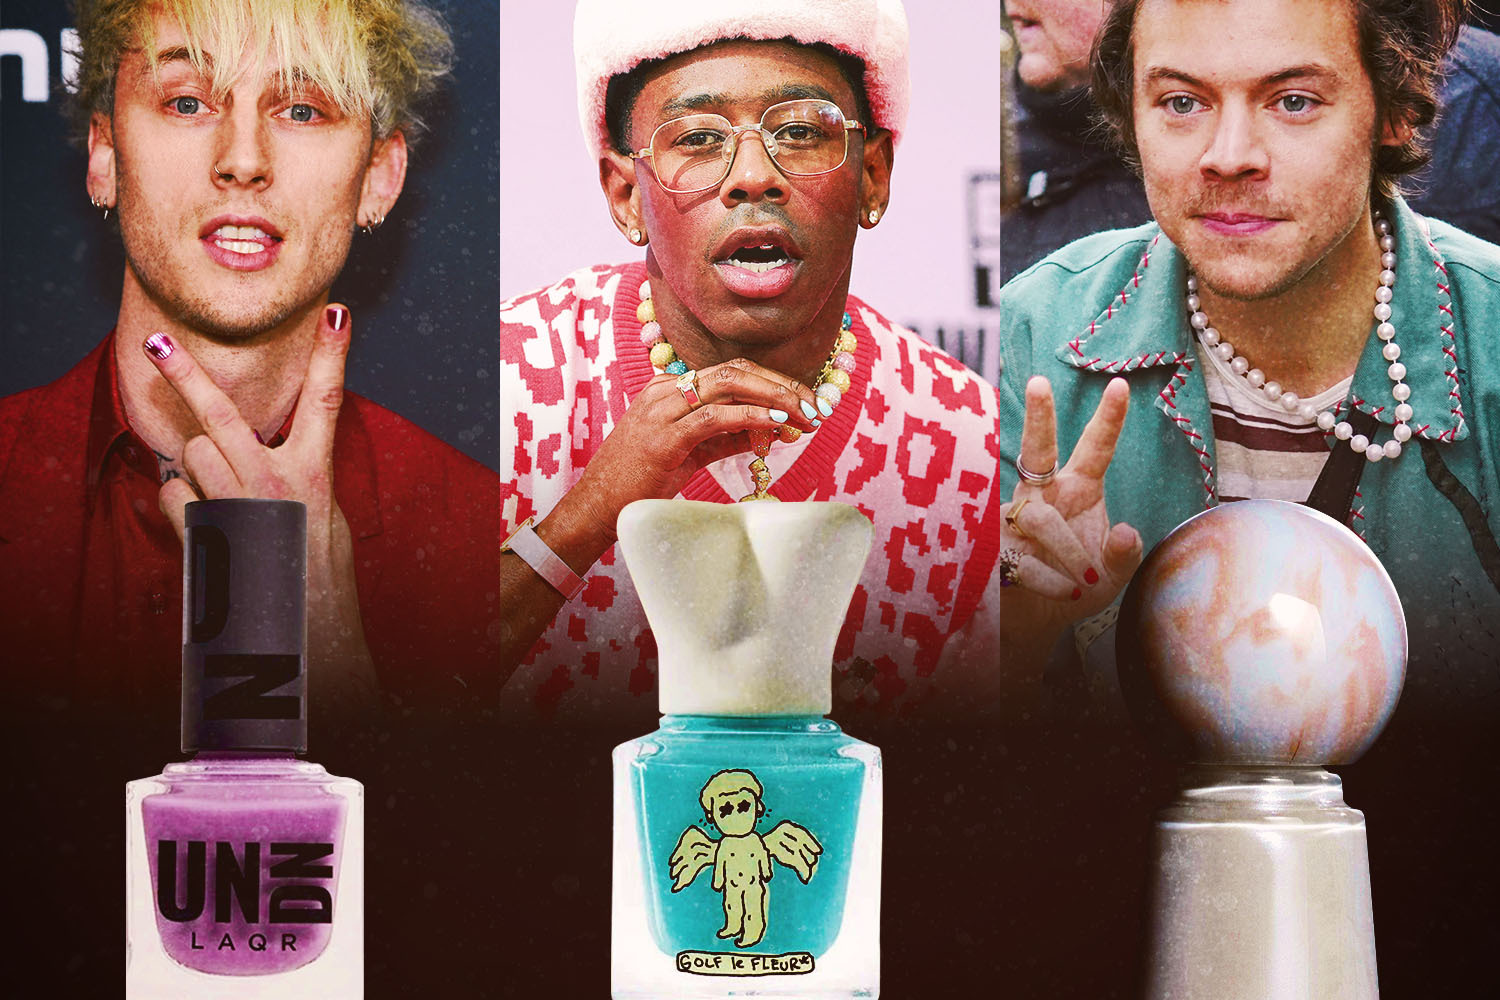 Harry Styles, Tyler the Creator and Machine Gun Kelly are leading the charge to normalize male nail polish use